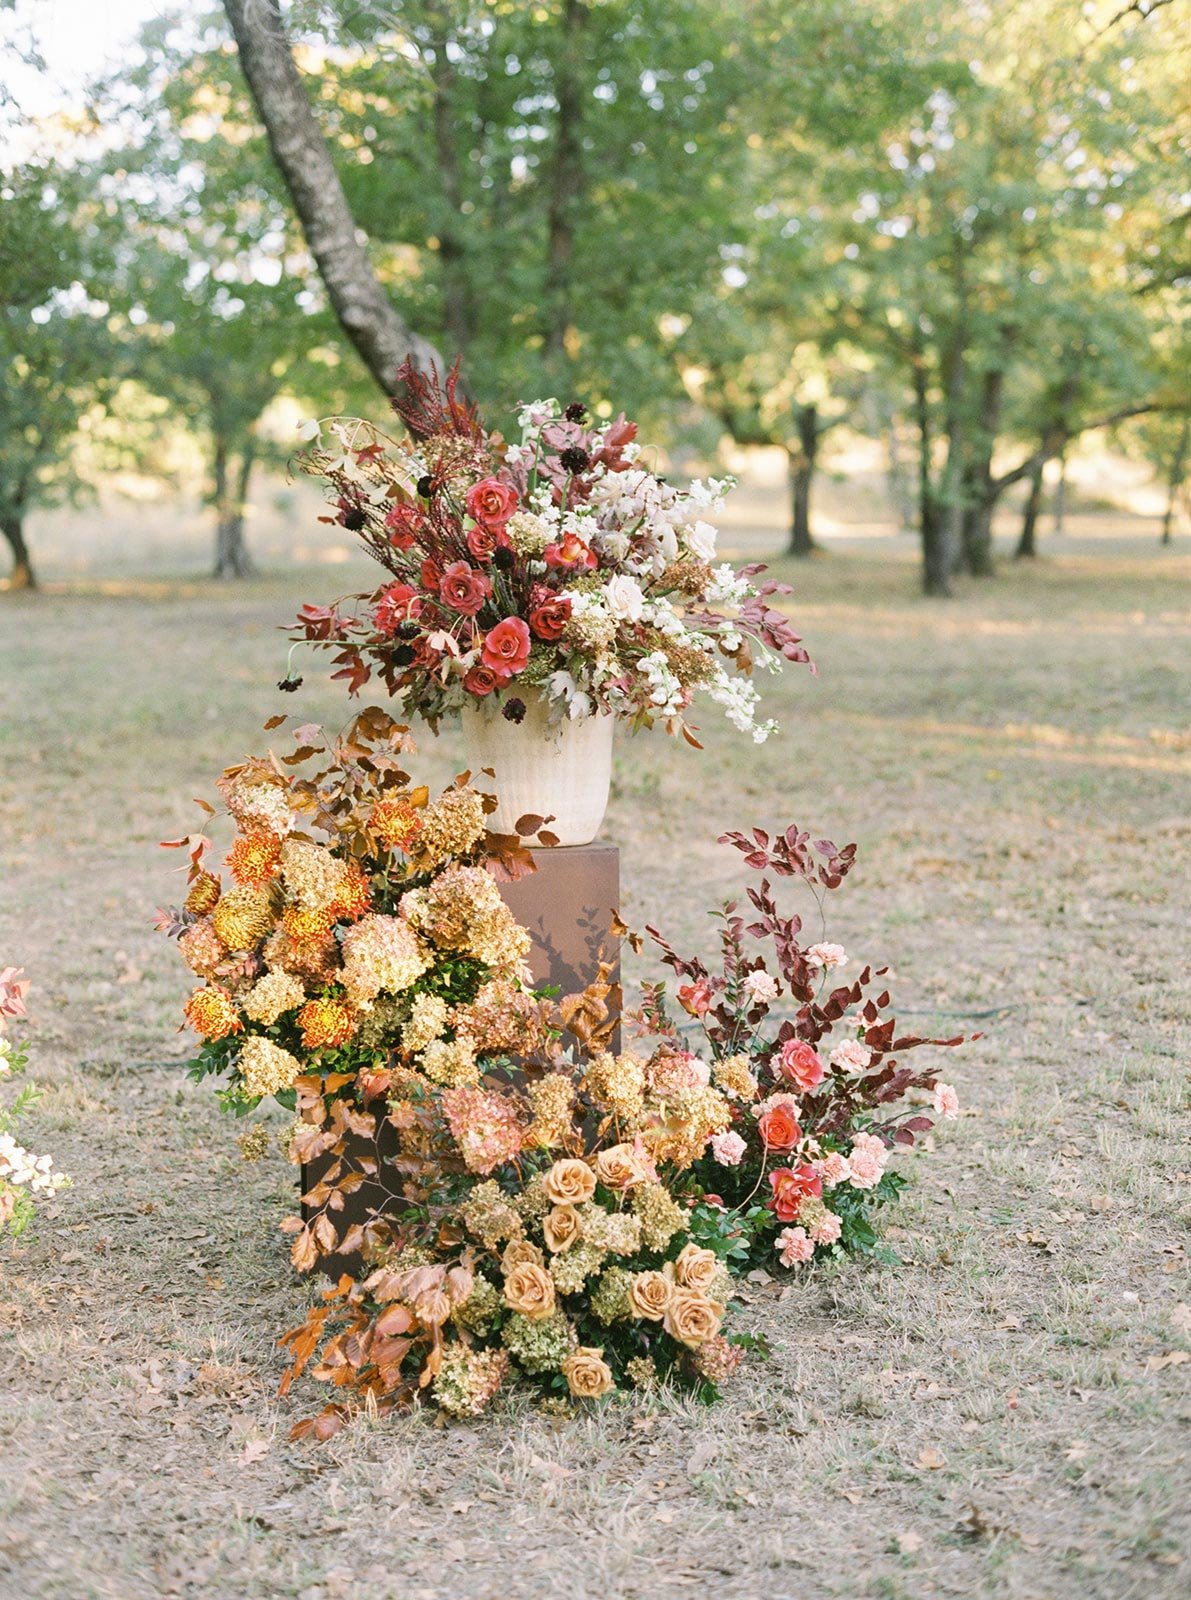 Ceremony with potted flowers on wood pedestals